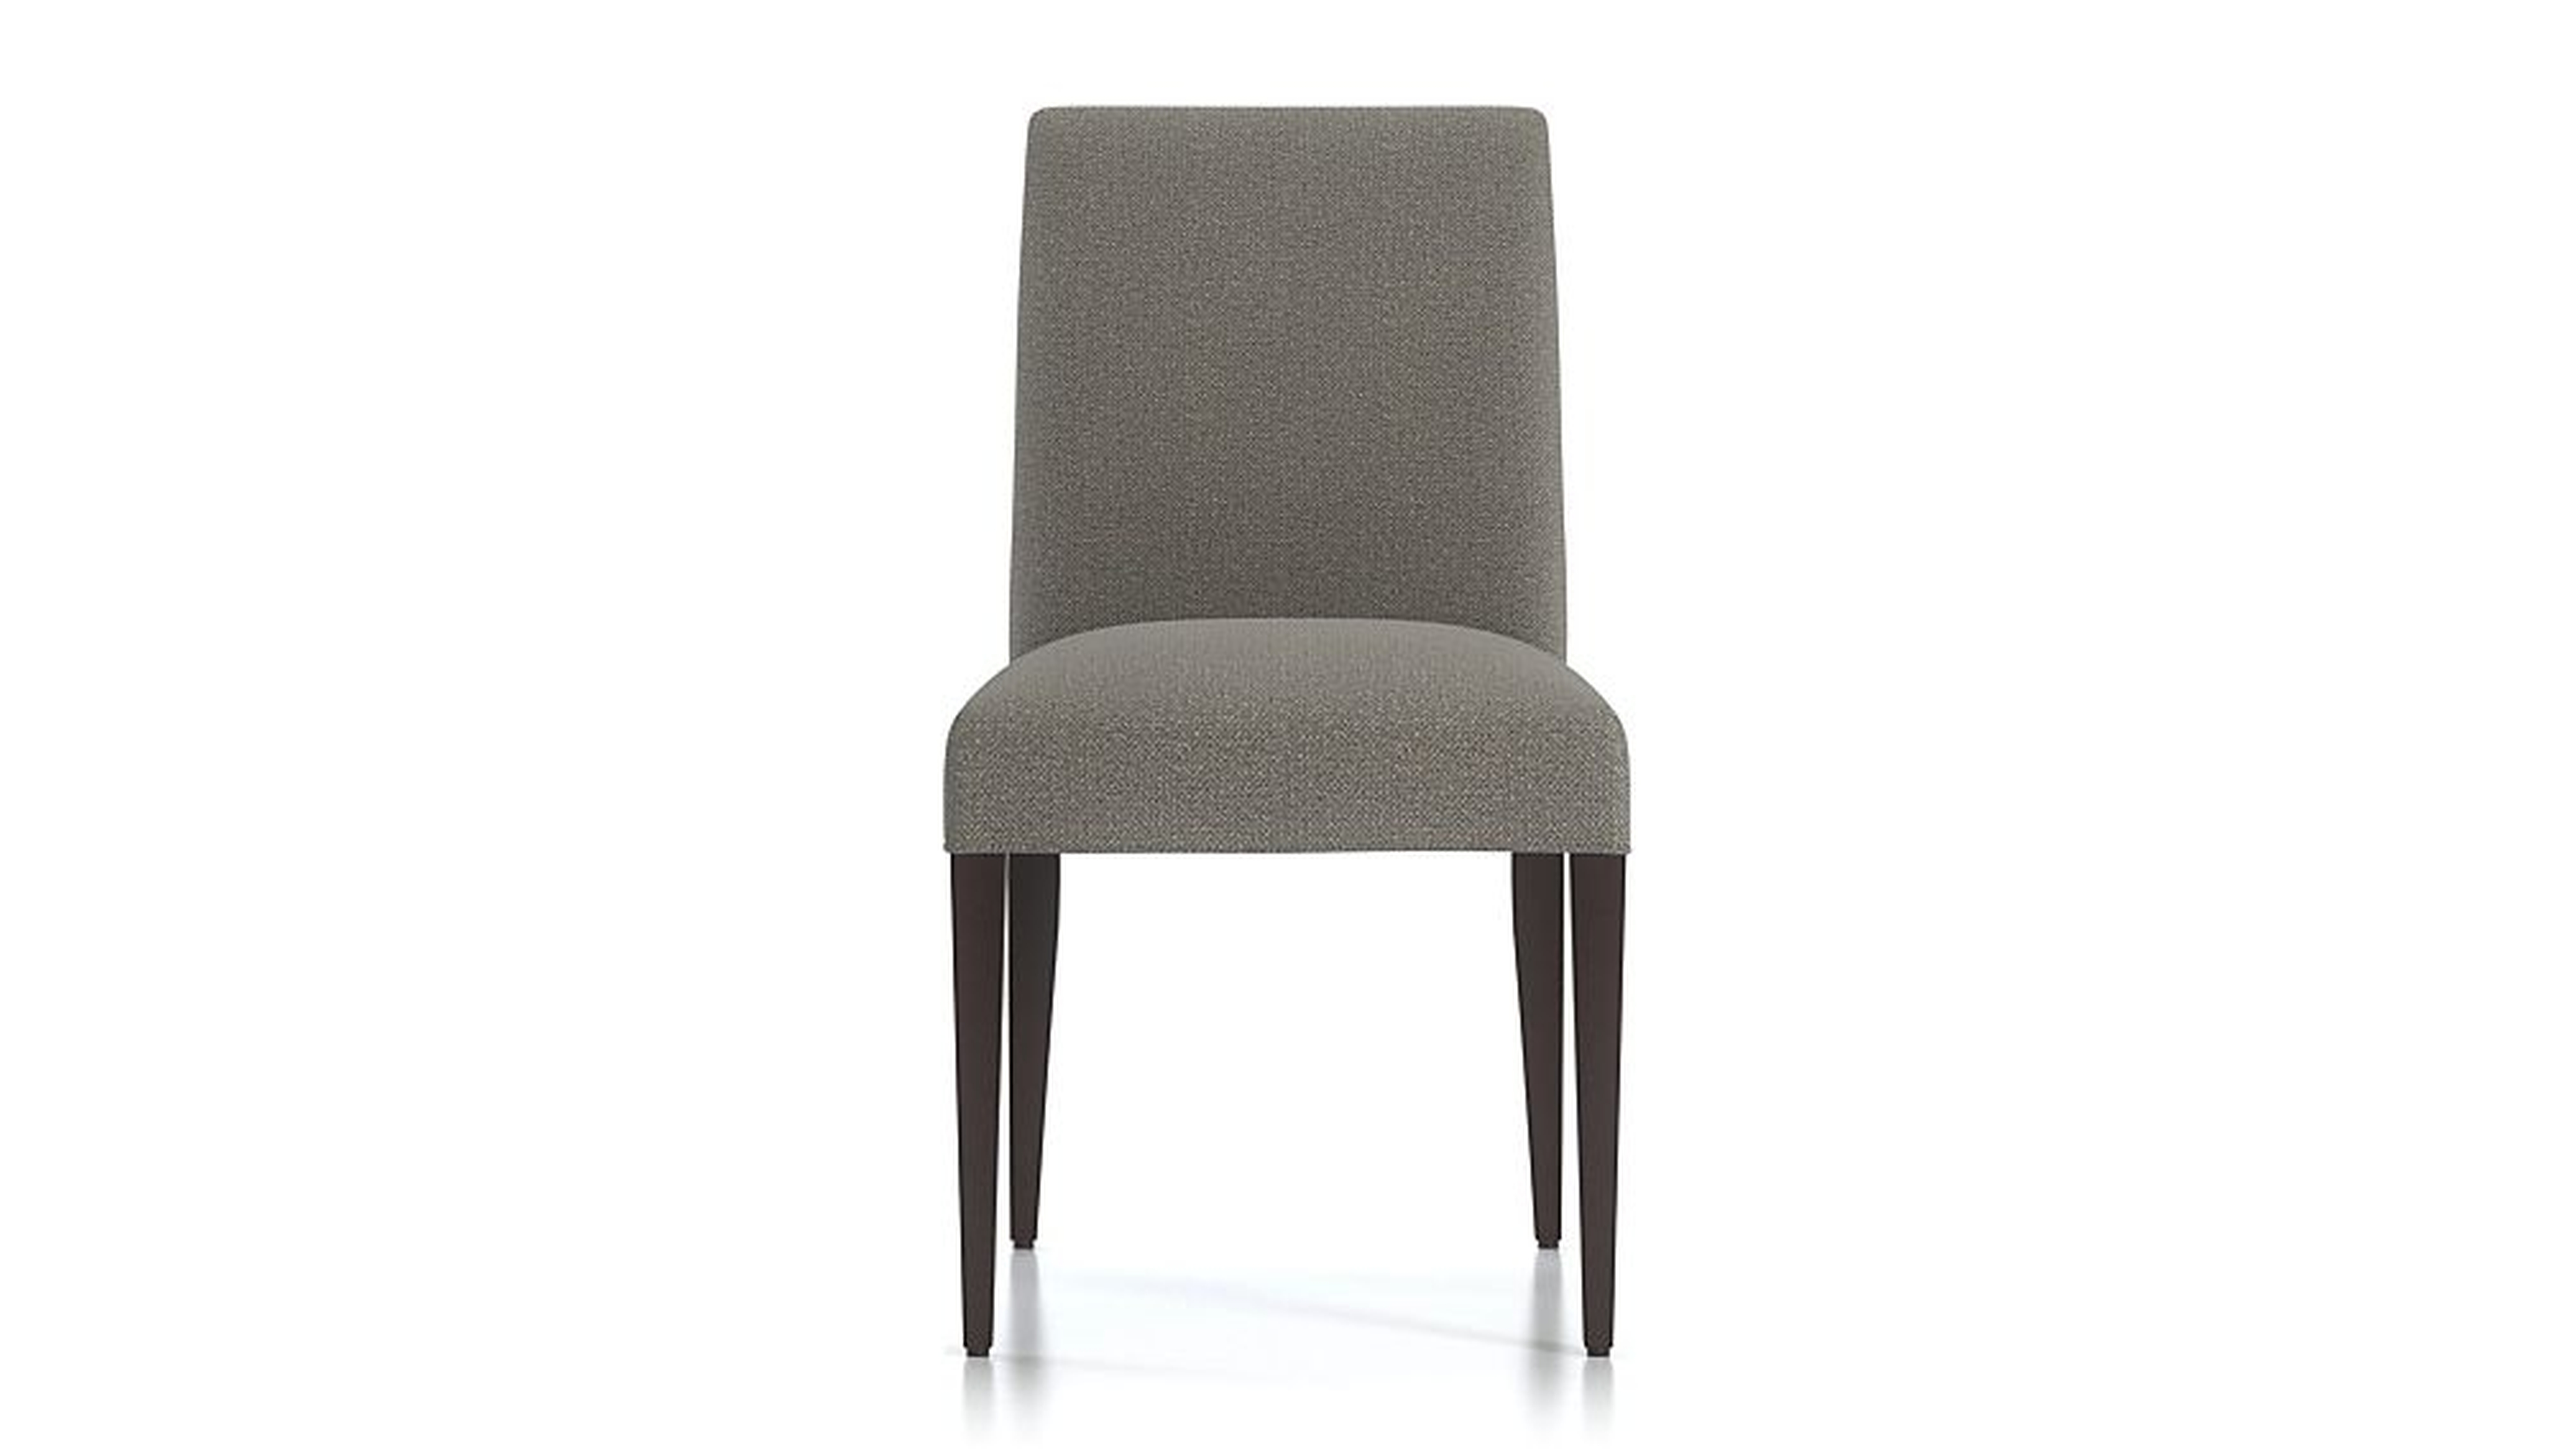 Miles Upholstered Dining Chair - Crate and Barrel